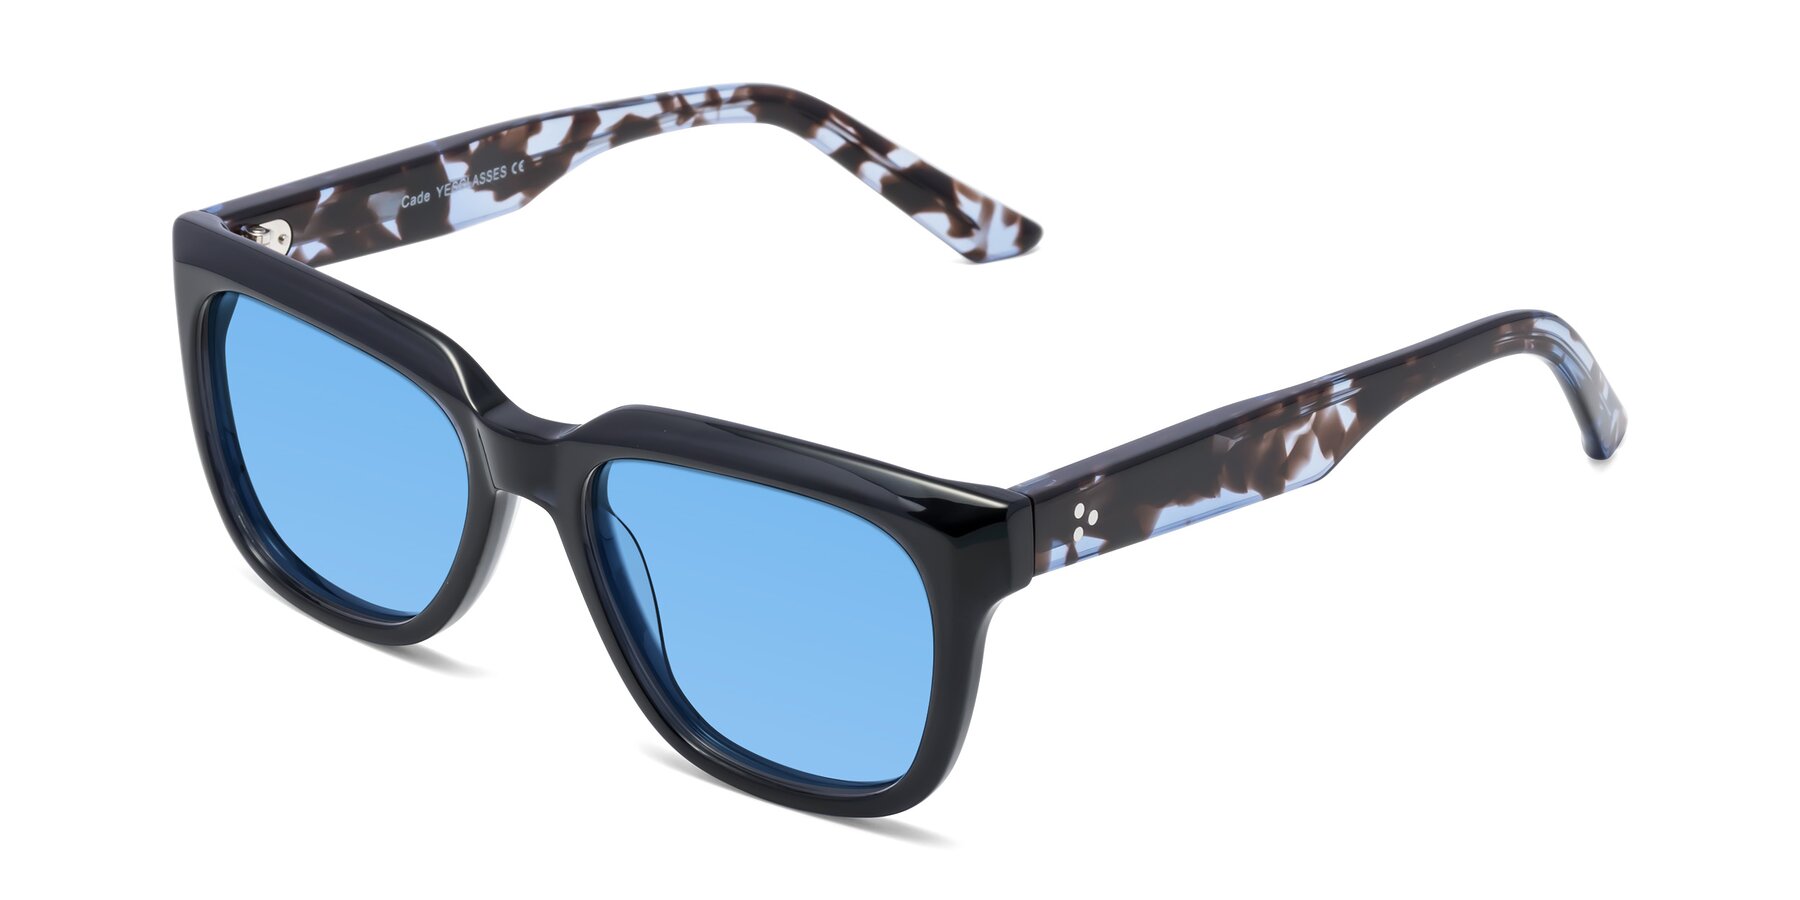 Angle of Cade in Dark Blue-Tortoise with Medium Blue Tinted Lenses